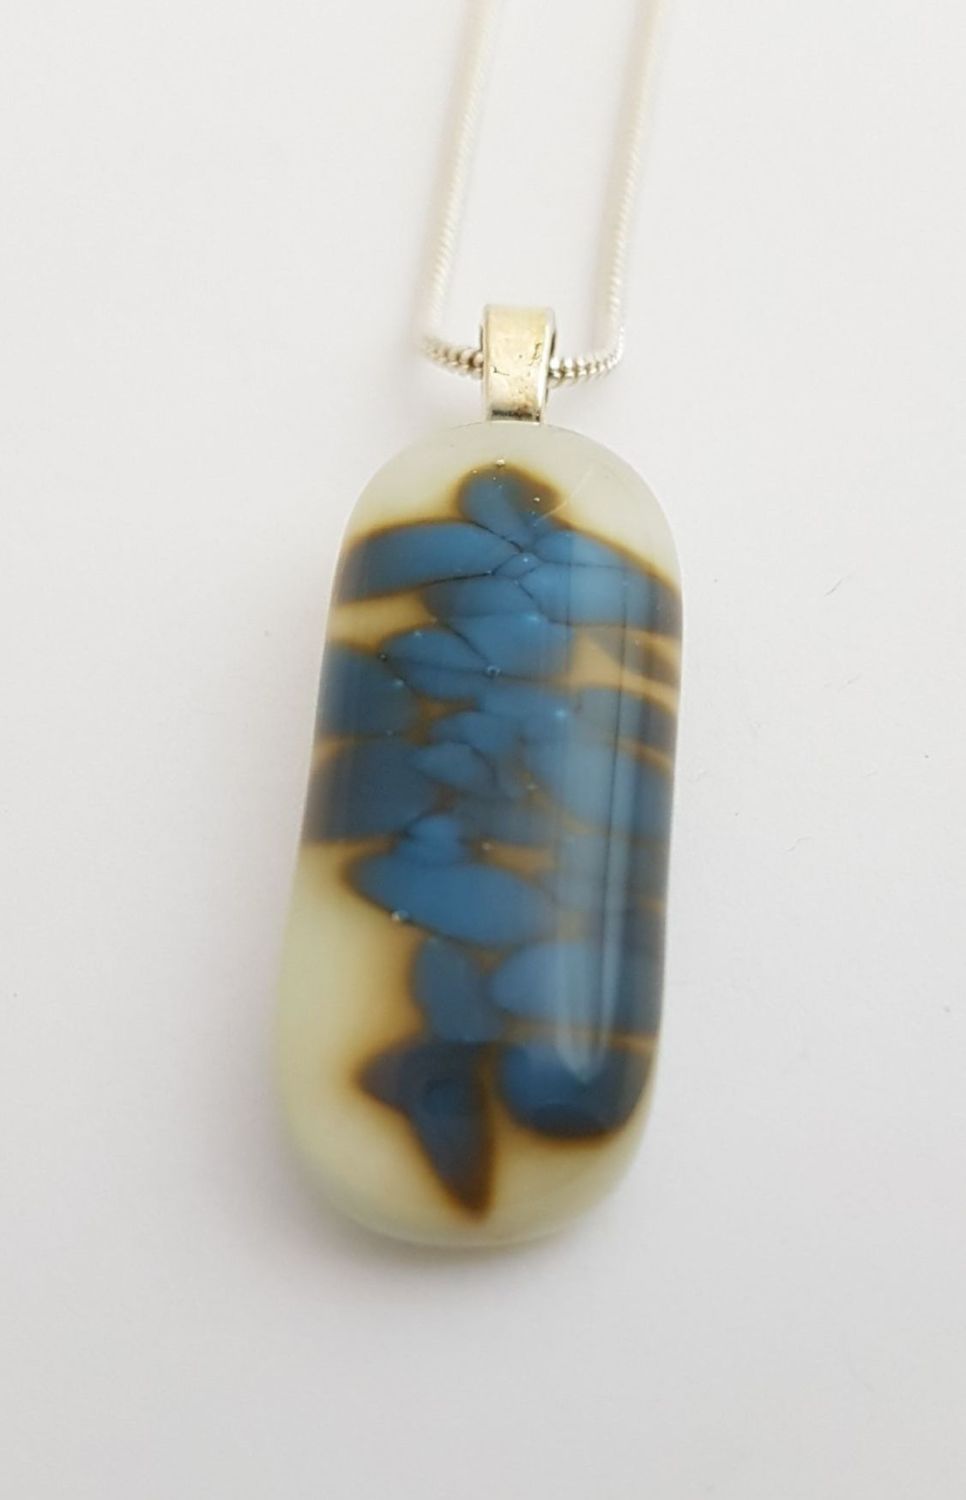 Ivory with Egyptian blue speckles pendant